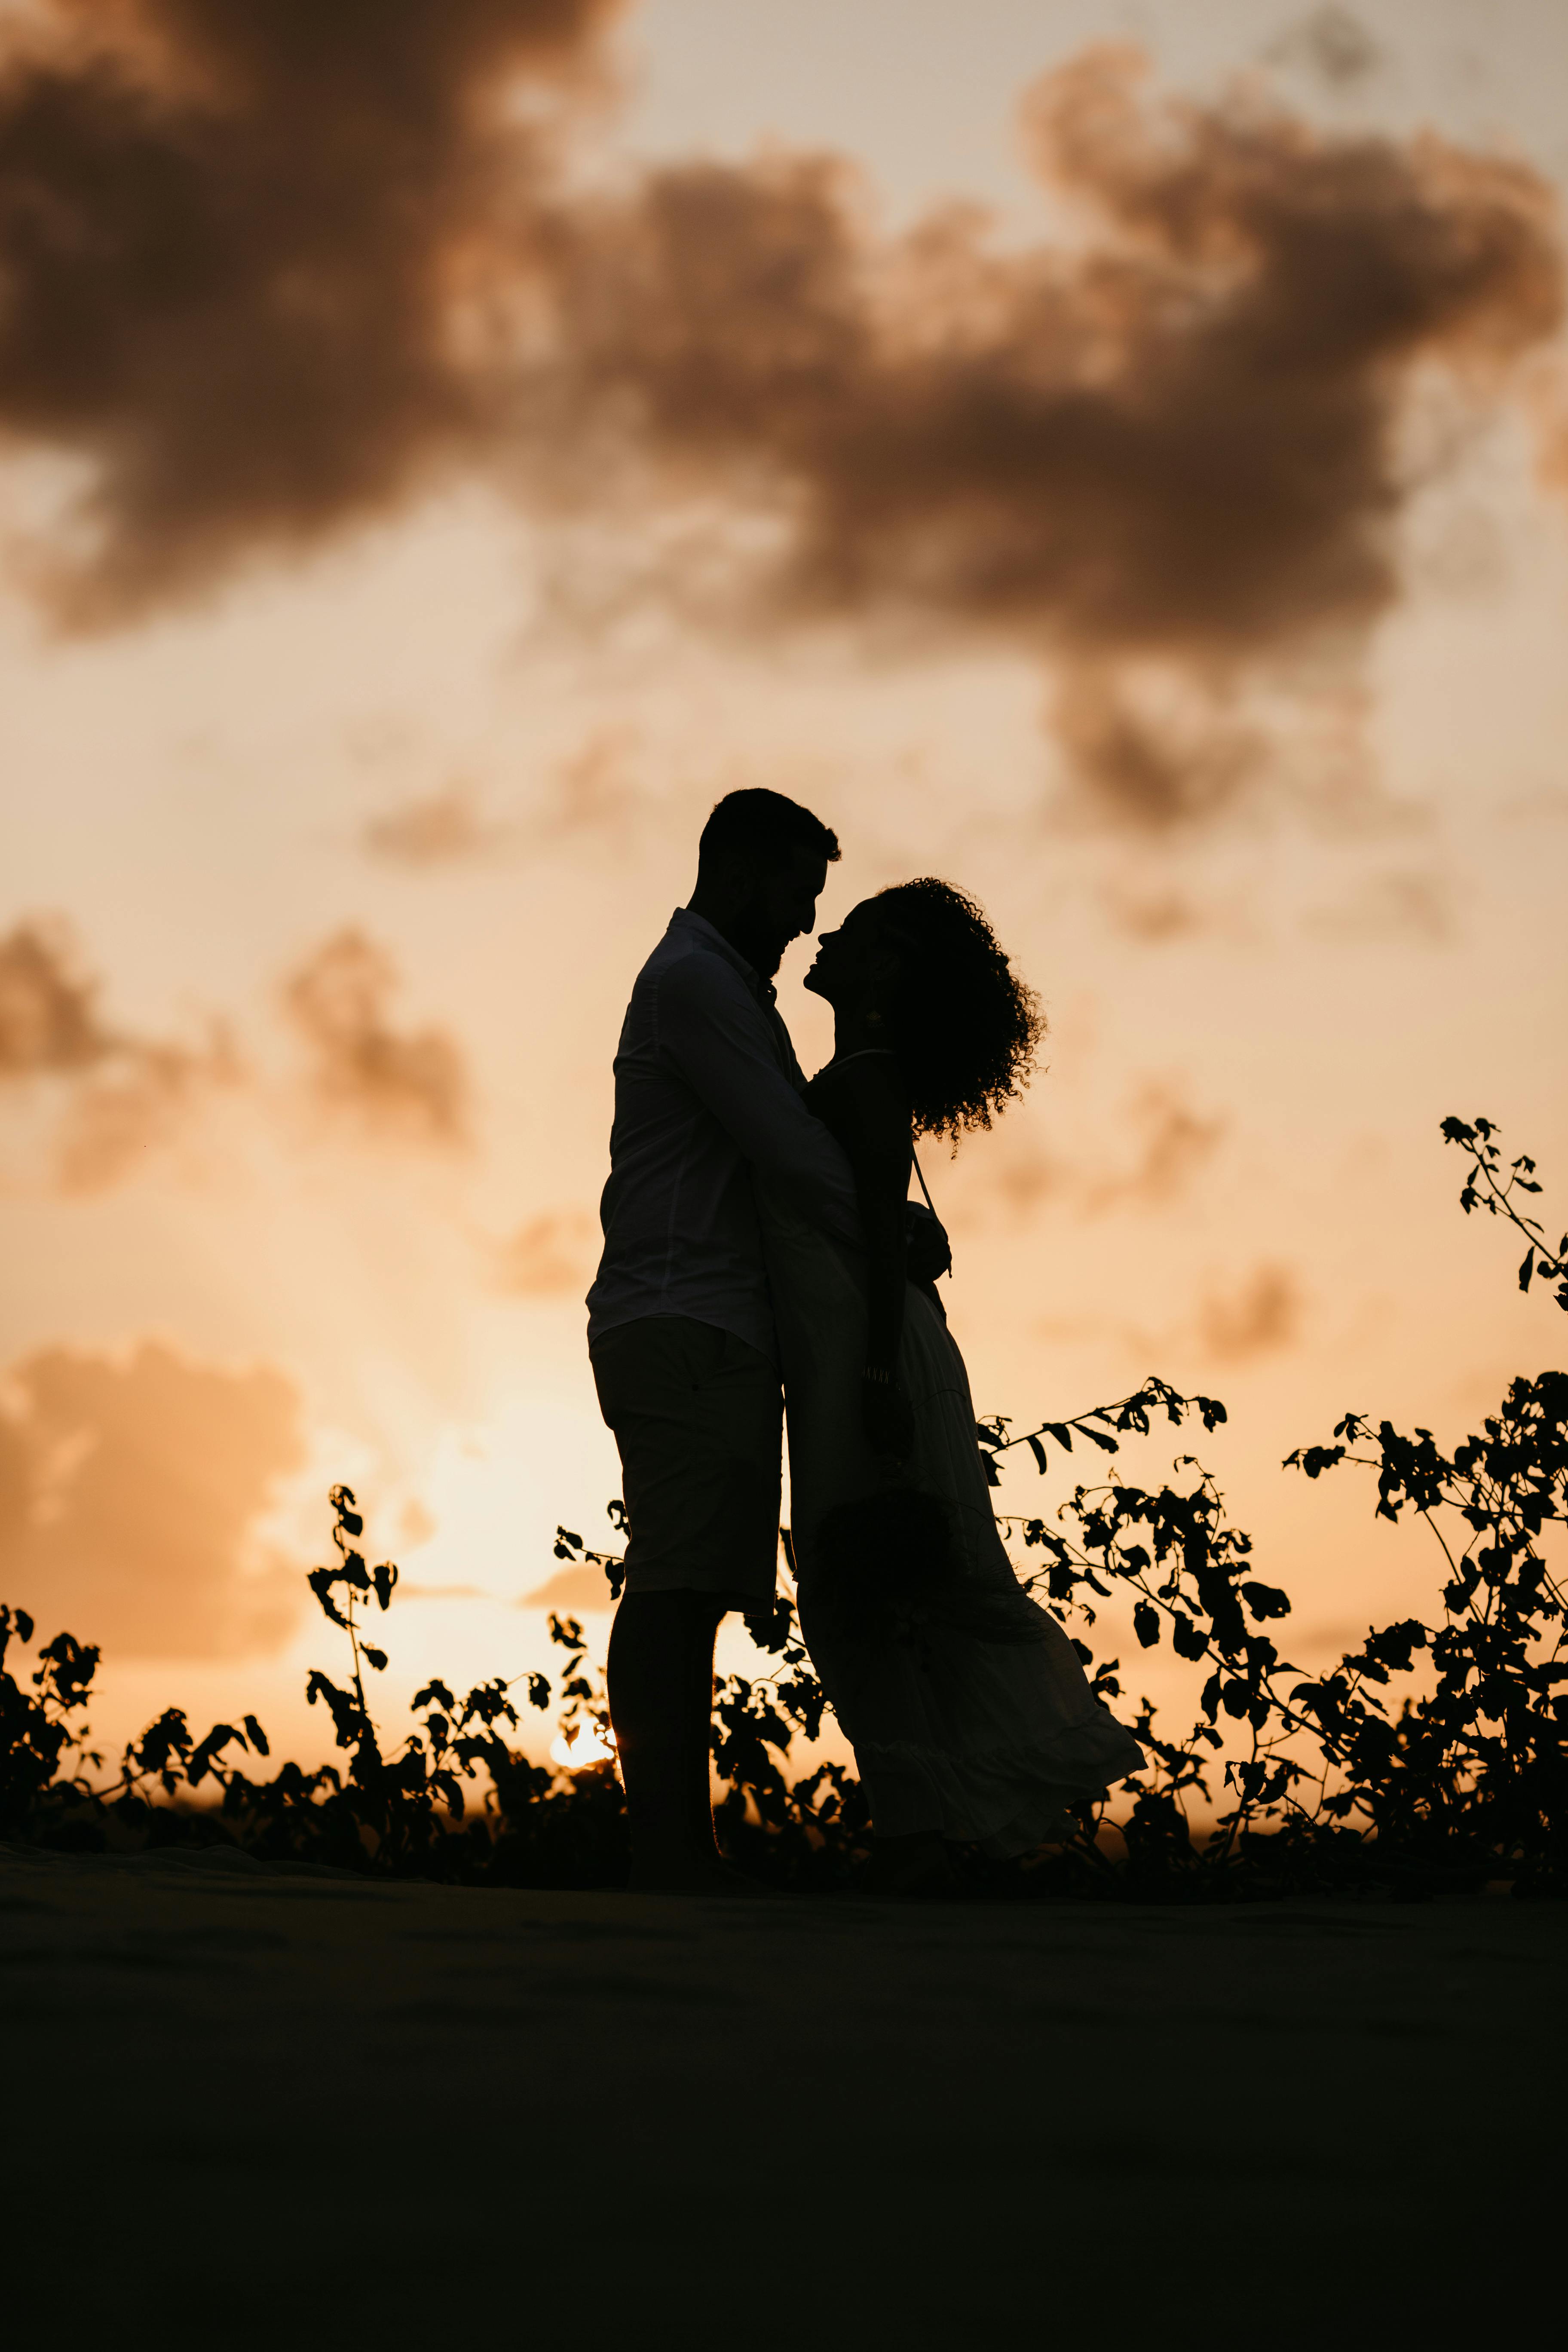 Silhouette of an Intimate Couple · Free Stock Photo